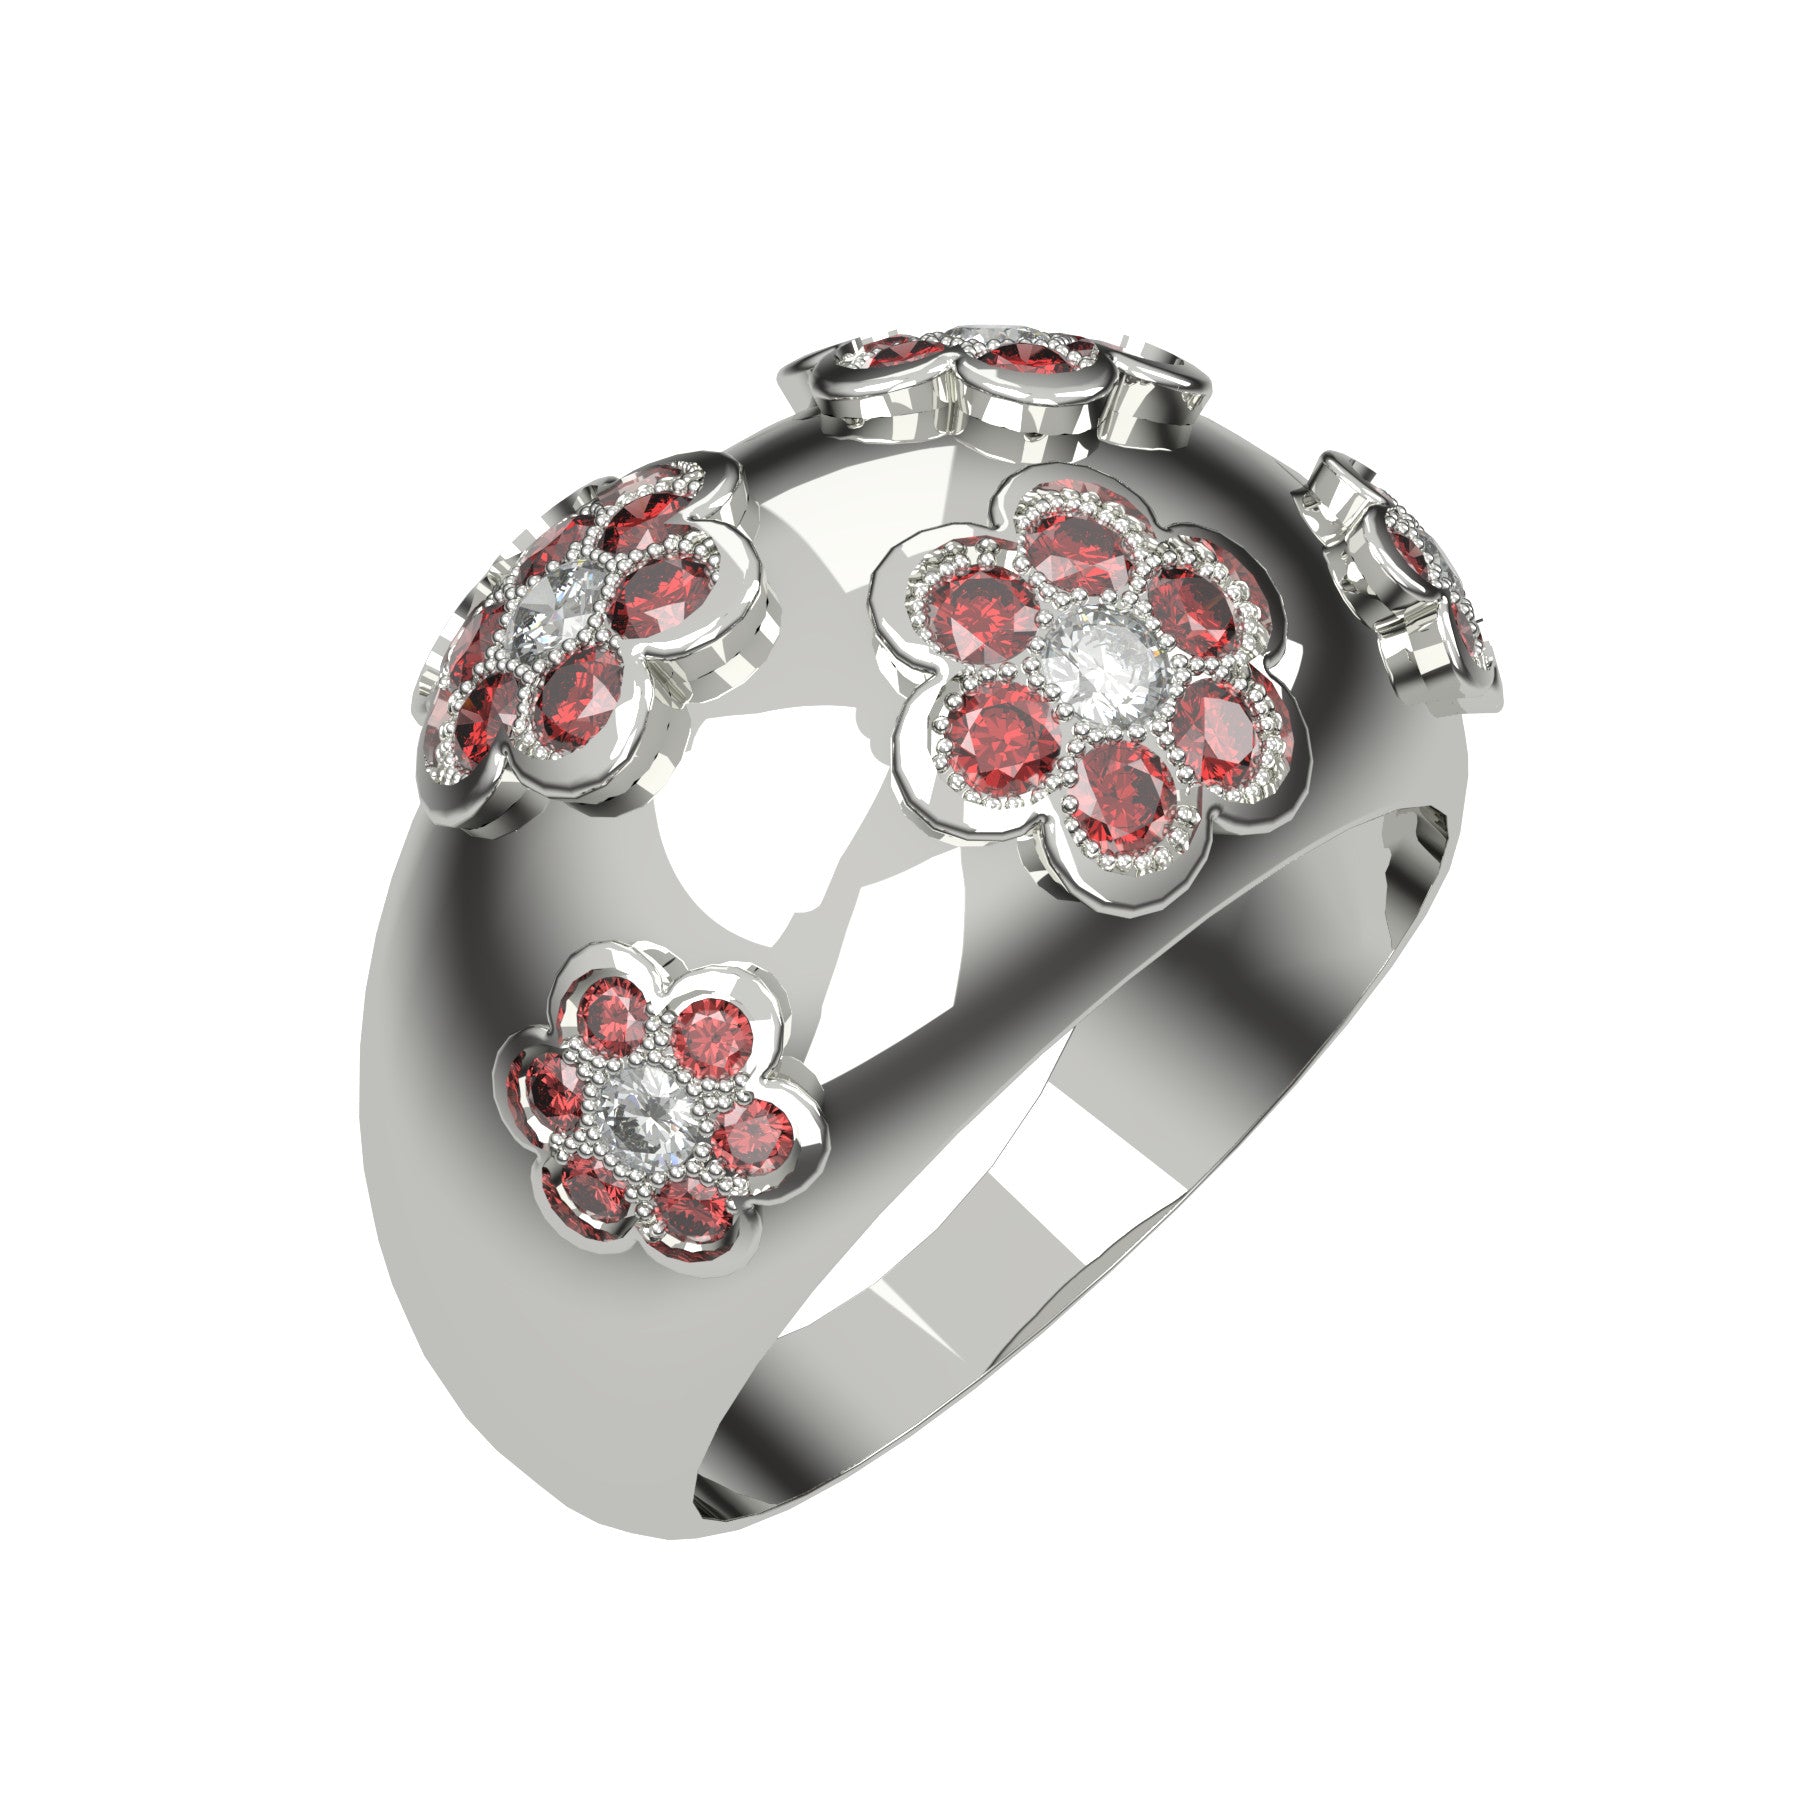 Blooming band ring, natural round diamonds, natural round rubies, 18 k white gold, weight about 7,50 g (0.26 oz), width 12 mm max